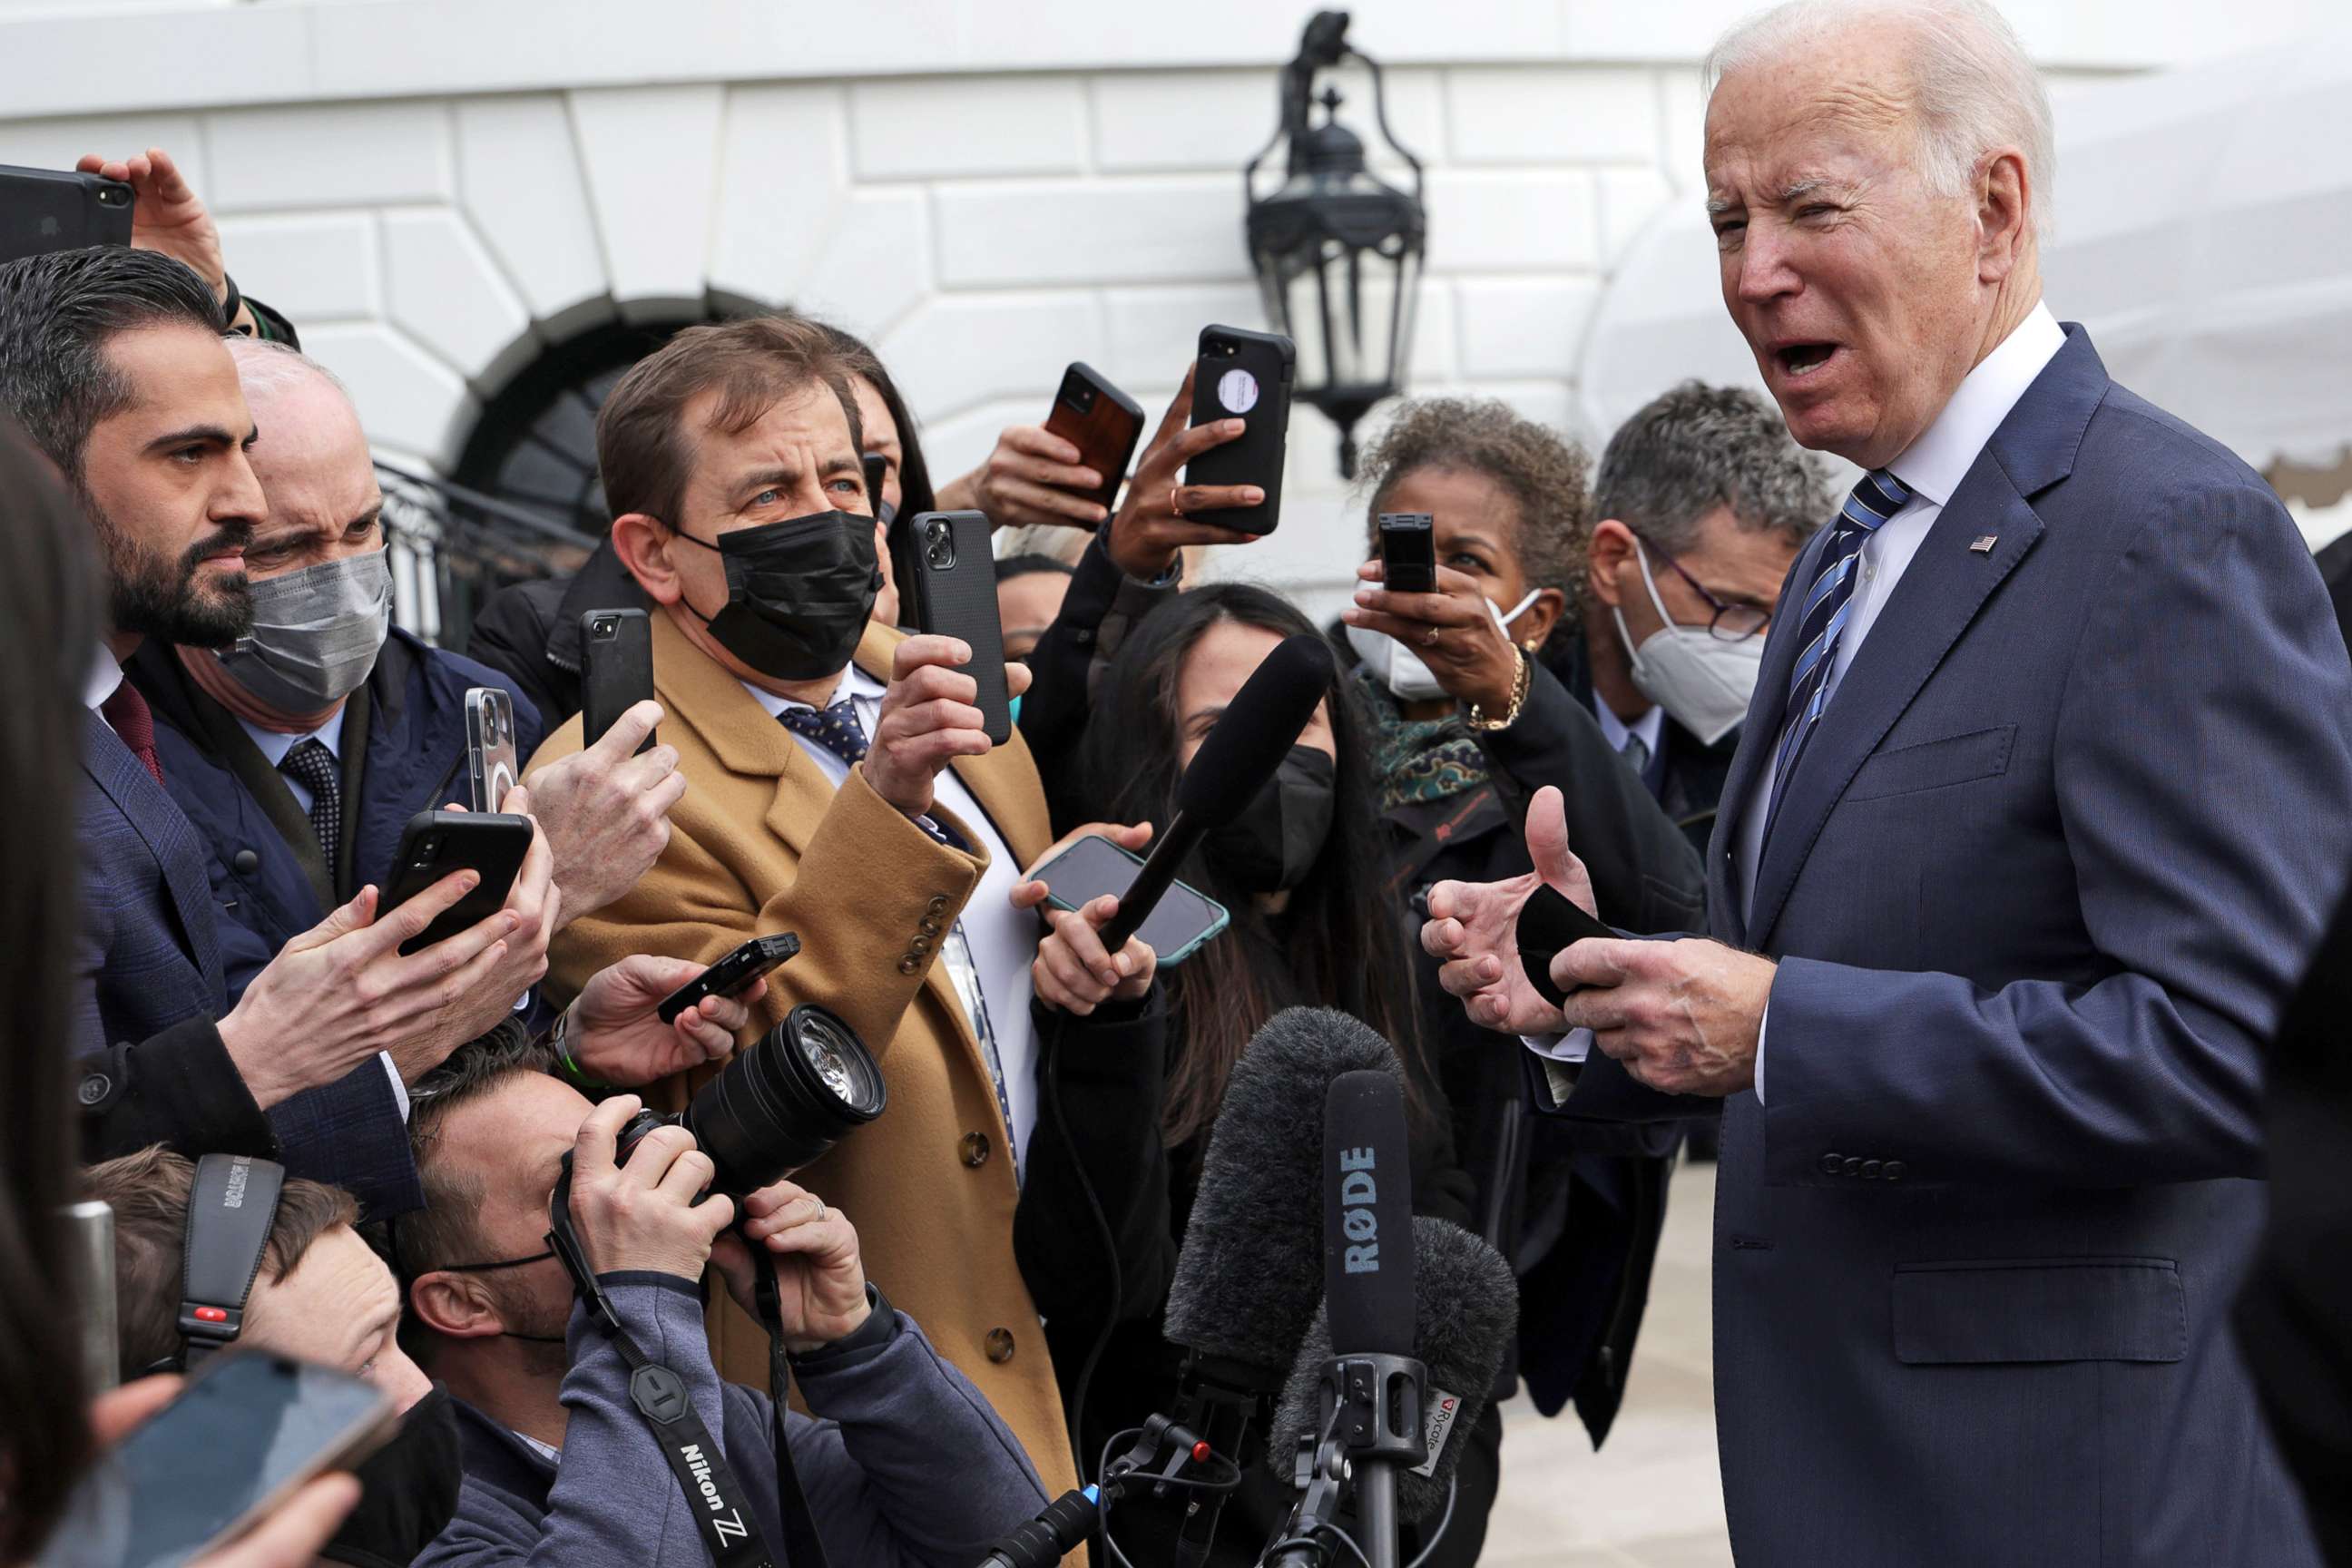 PHOTO: President Joe Biden speaks to the media about Russia's buildup on the Ukrainian border as he departs the White House for Cleveland in Washington, D.C., Feb. 17, 2022. The president said there is a 'very high' risk of a Russian invasion of Ukraine.